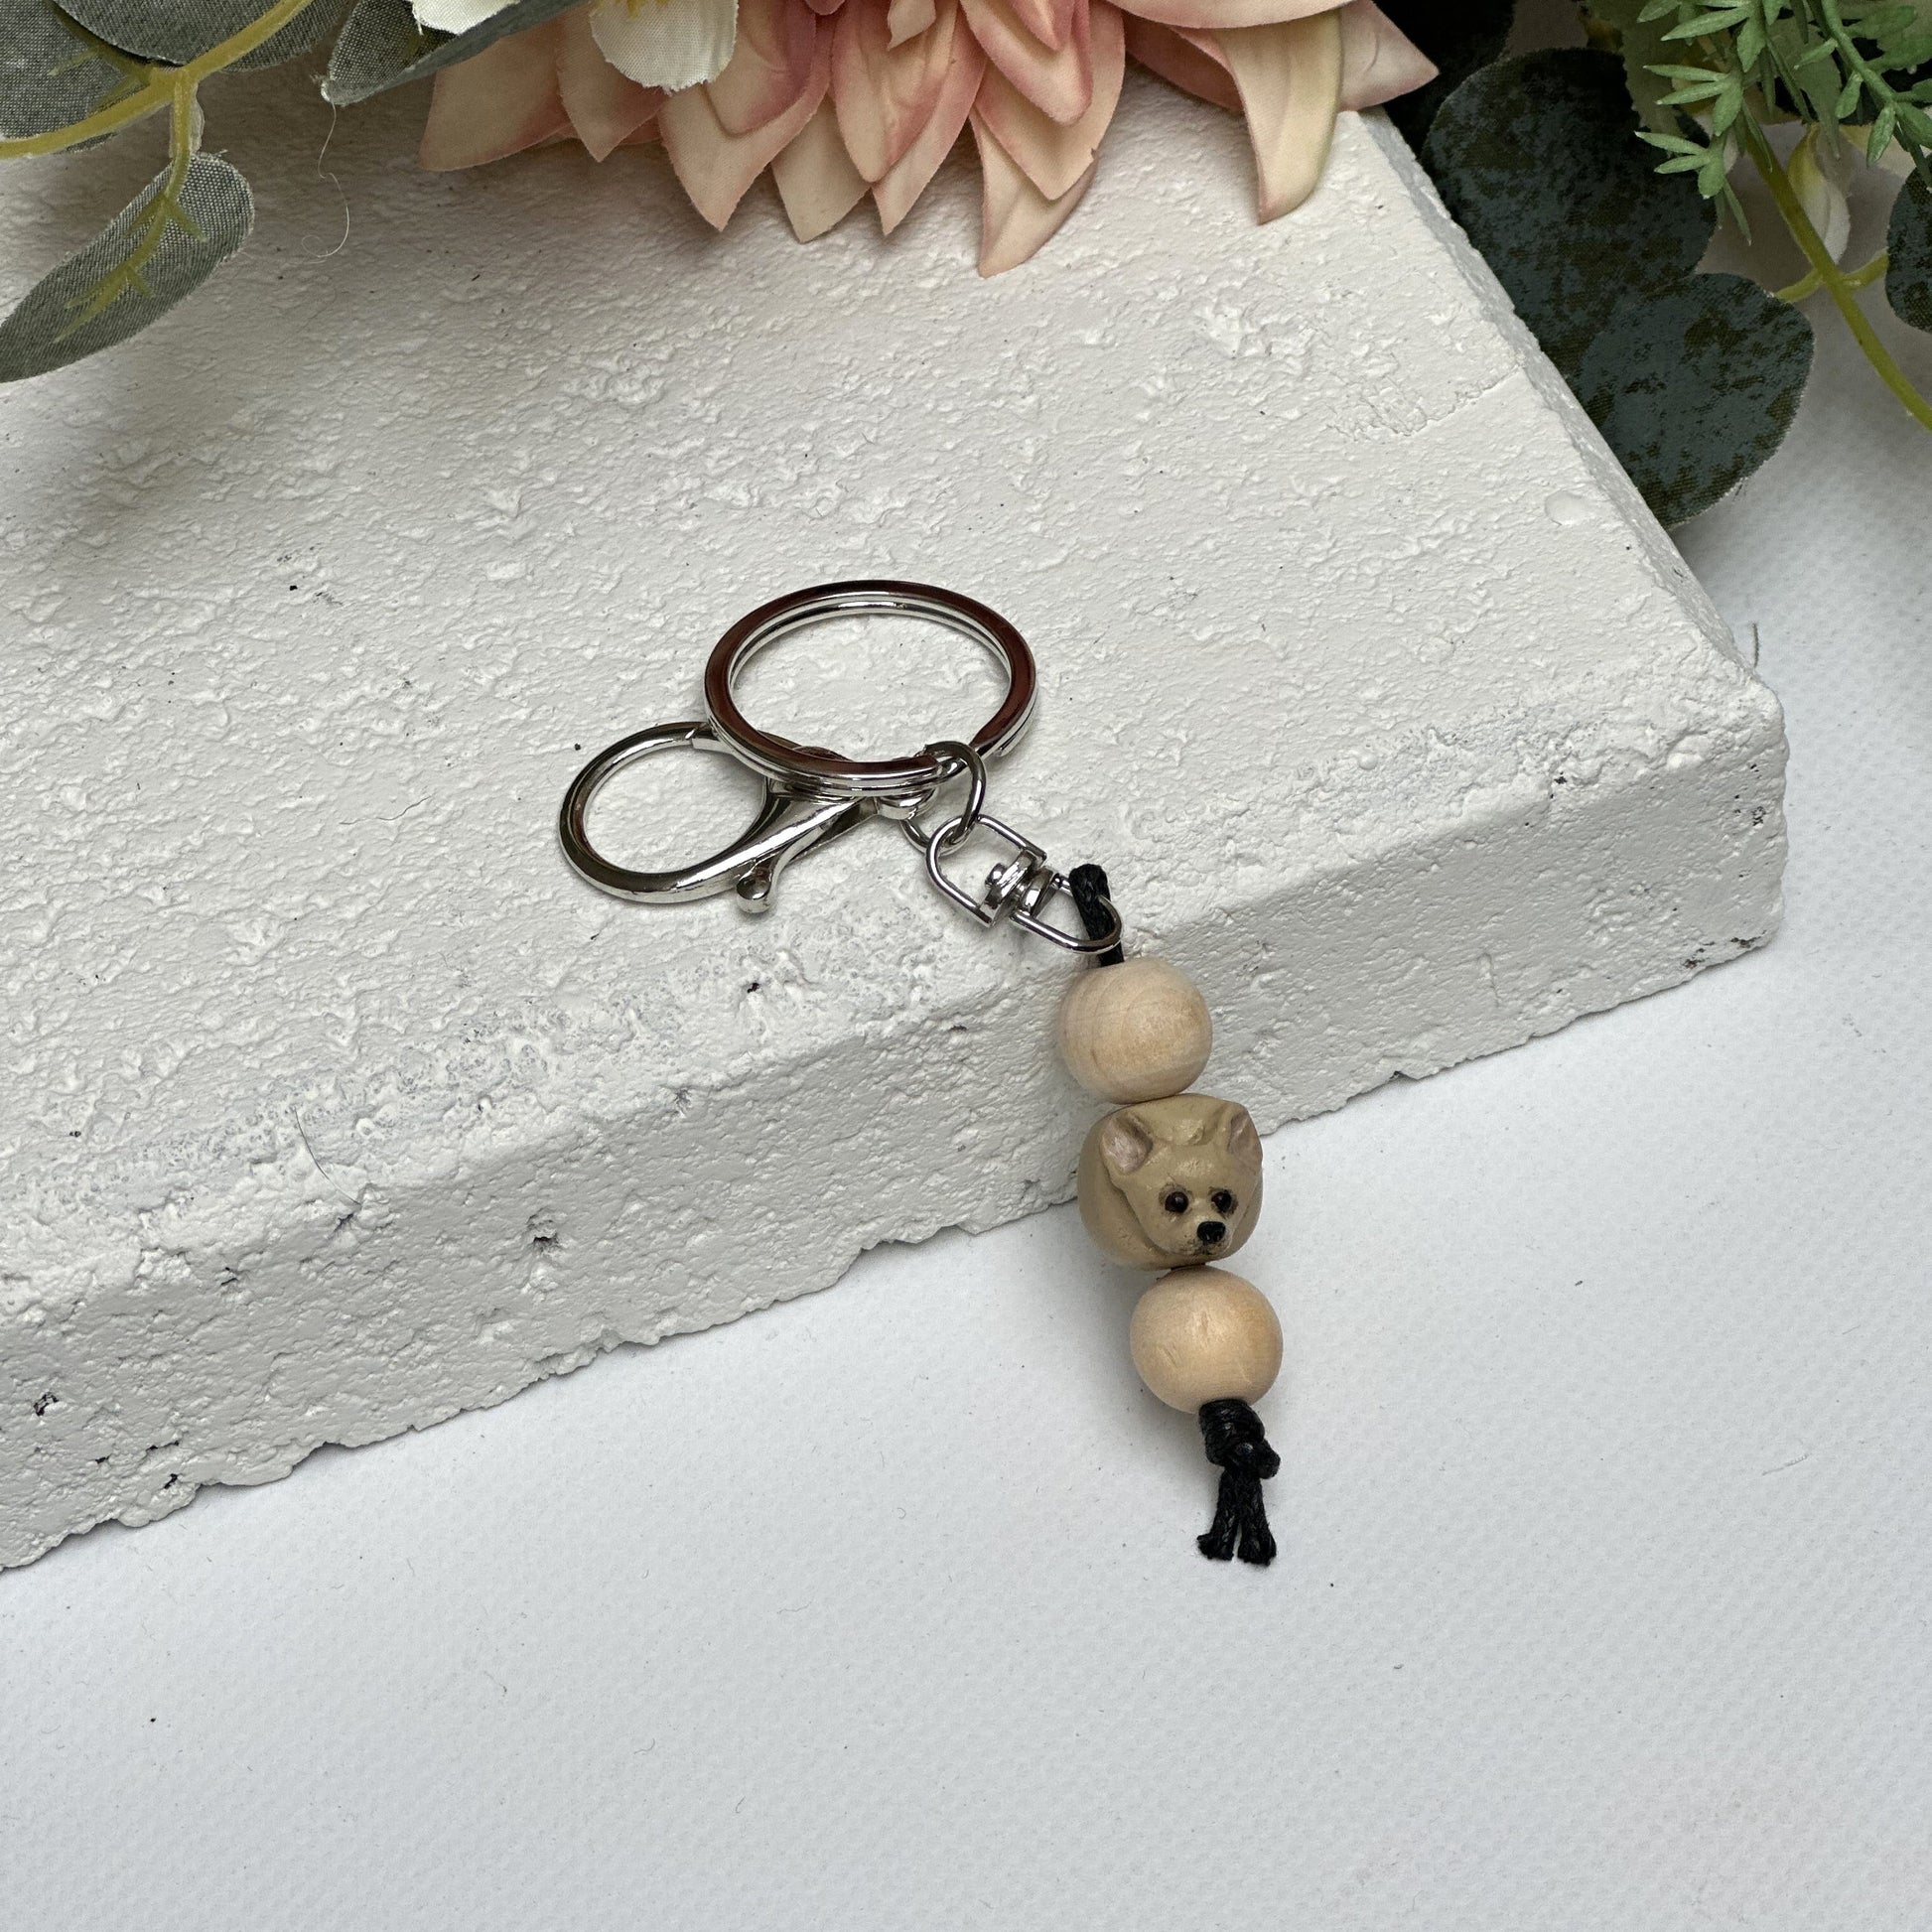 Handmade chihuahua dog polymer clay and timber keying on white textured background with a pink flower in the background